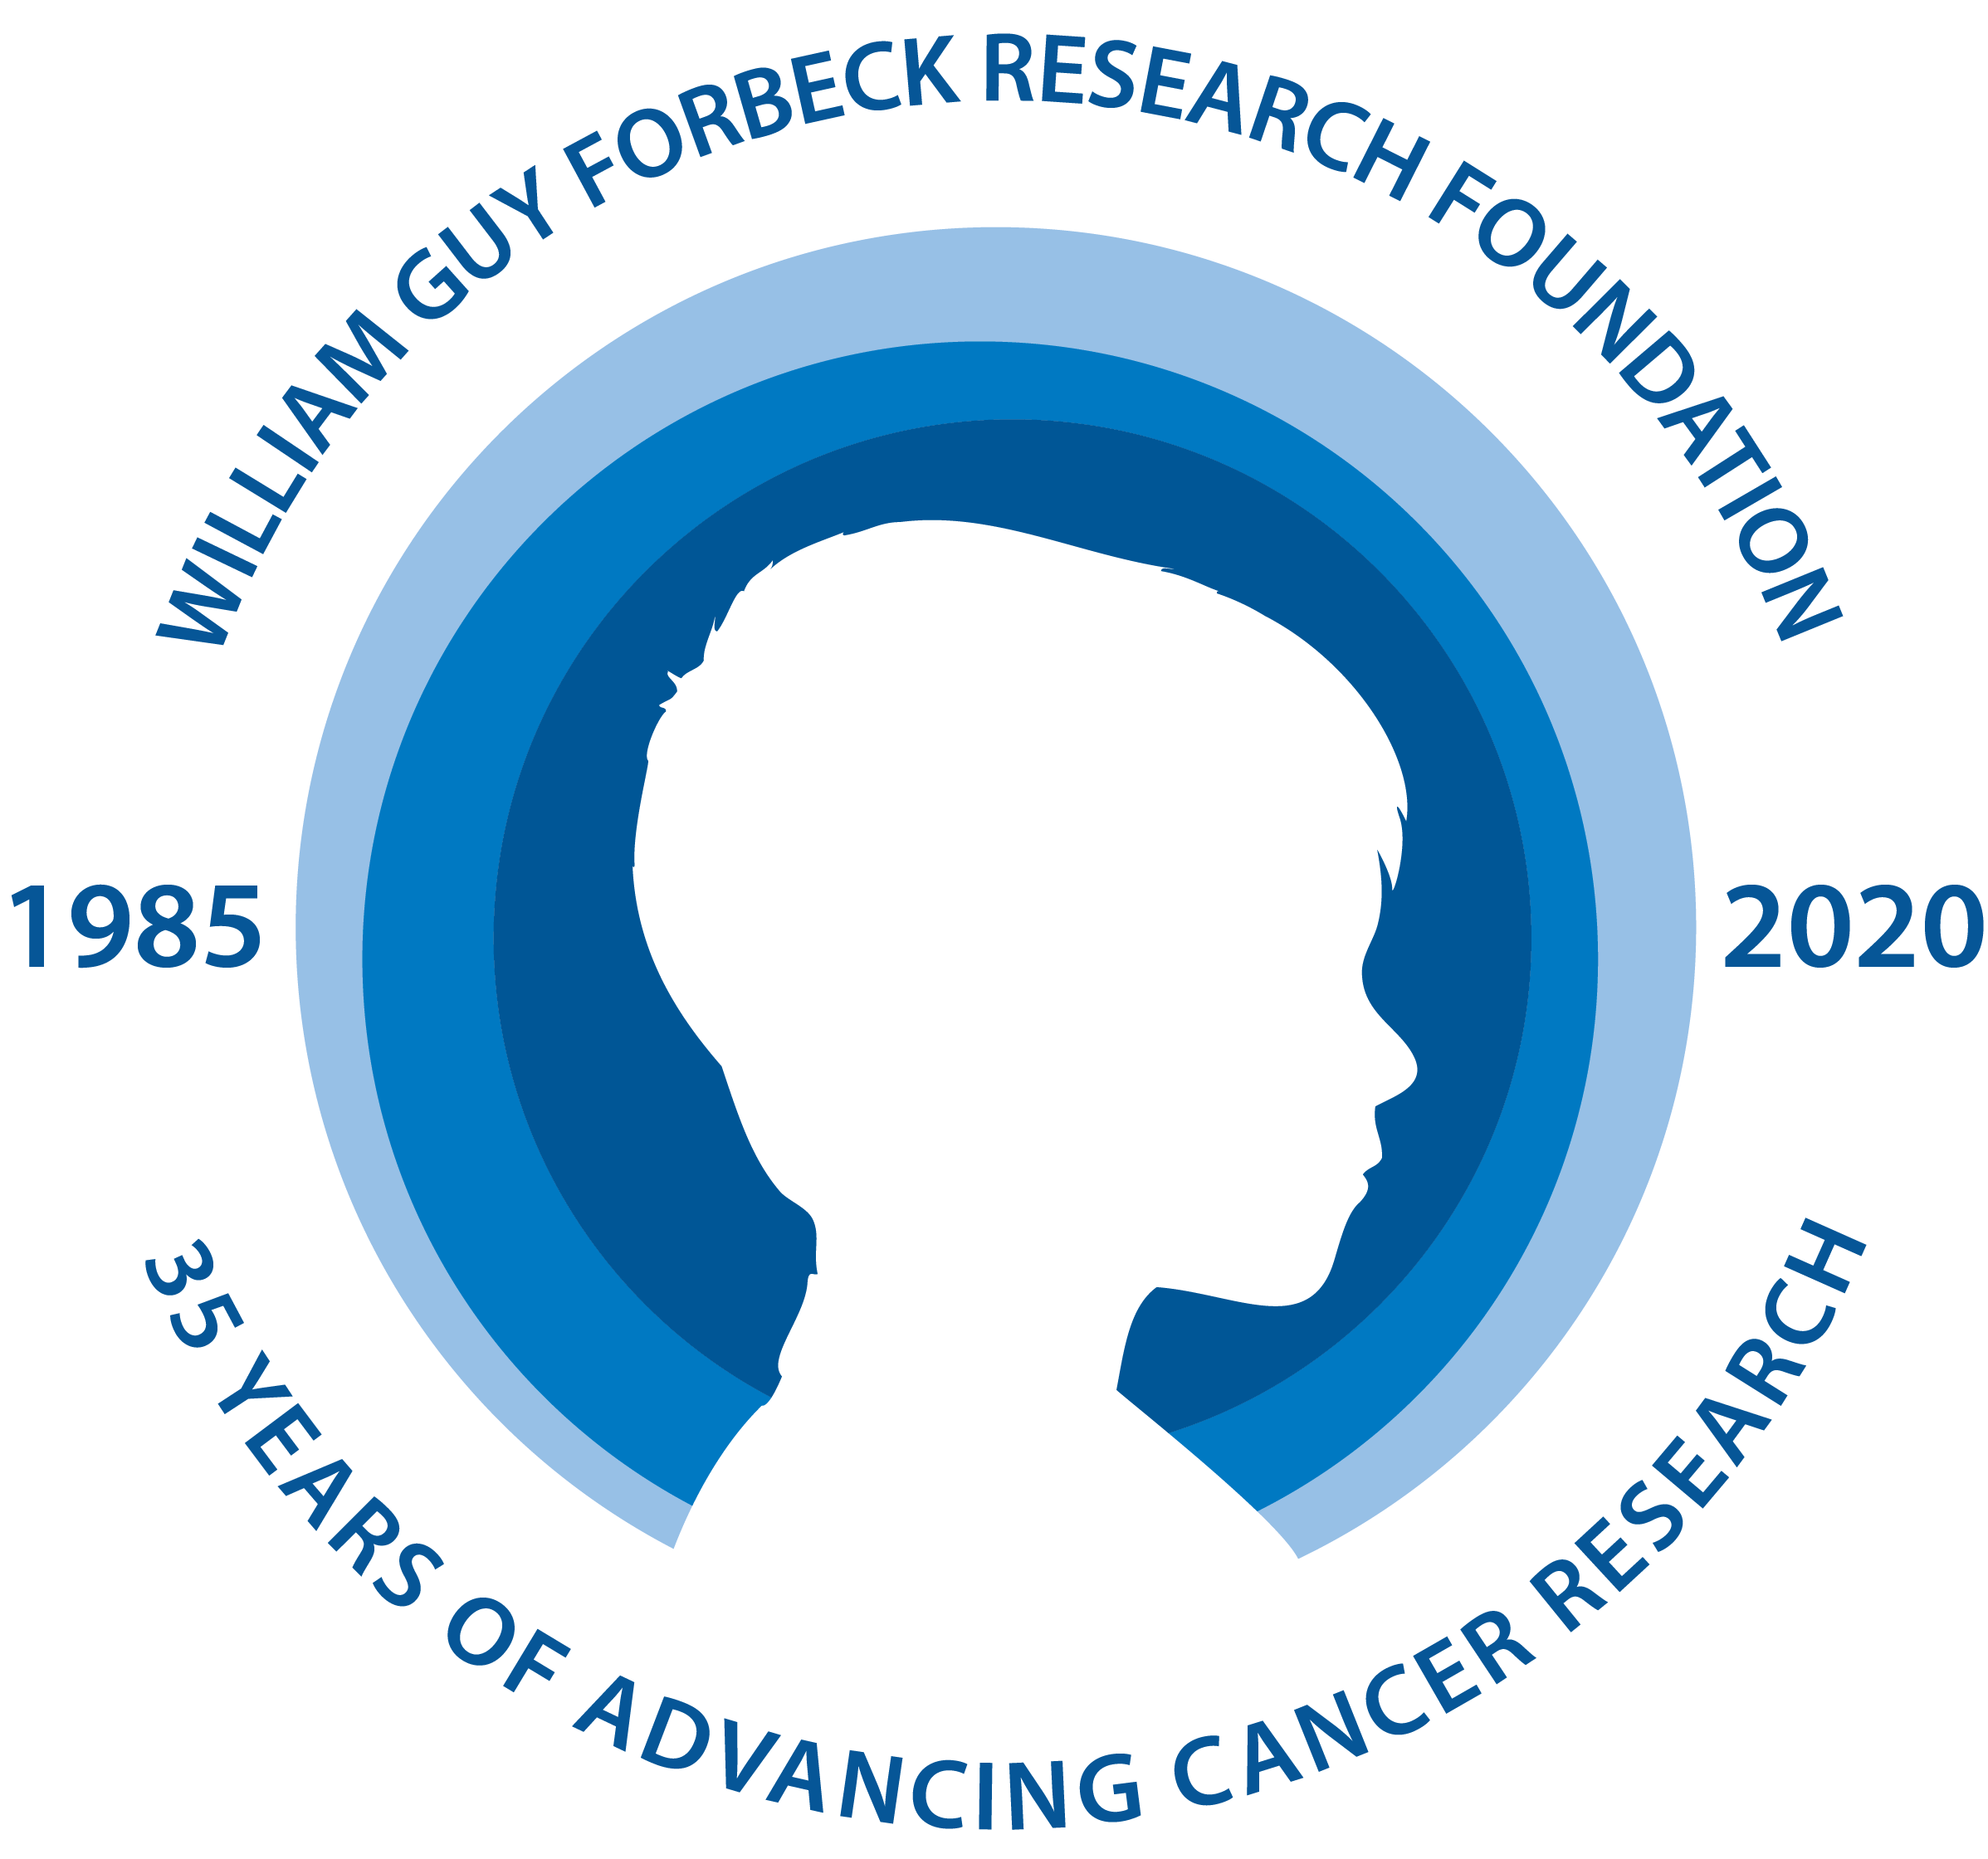 William Guy Forbeck Research Foundation Logo